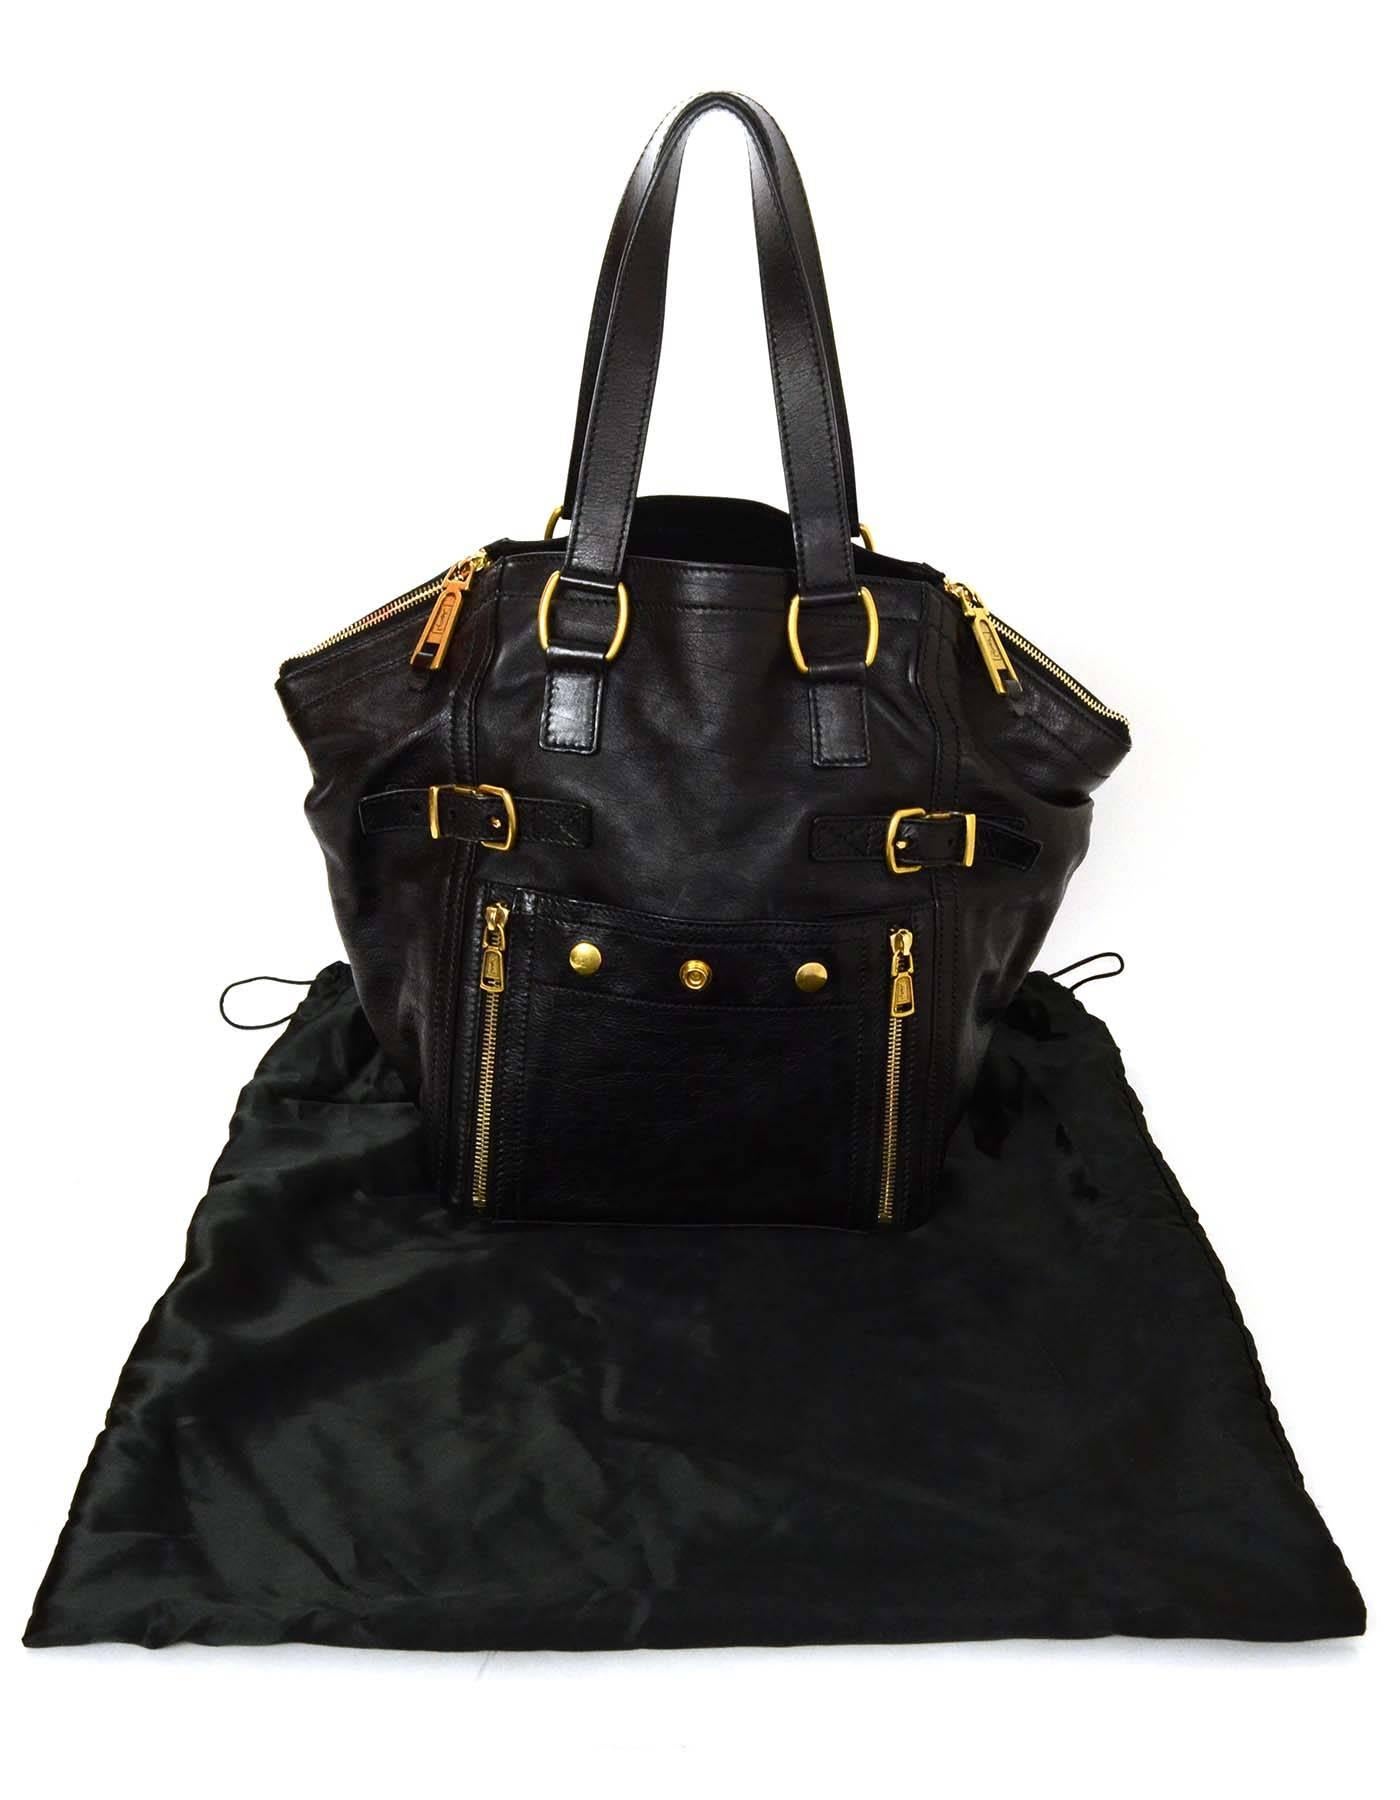 Yves Saint Laurent Black Leather Small Downtown Tote Bag 6